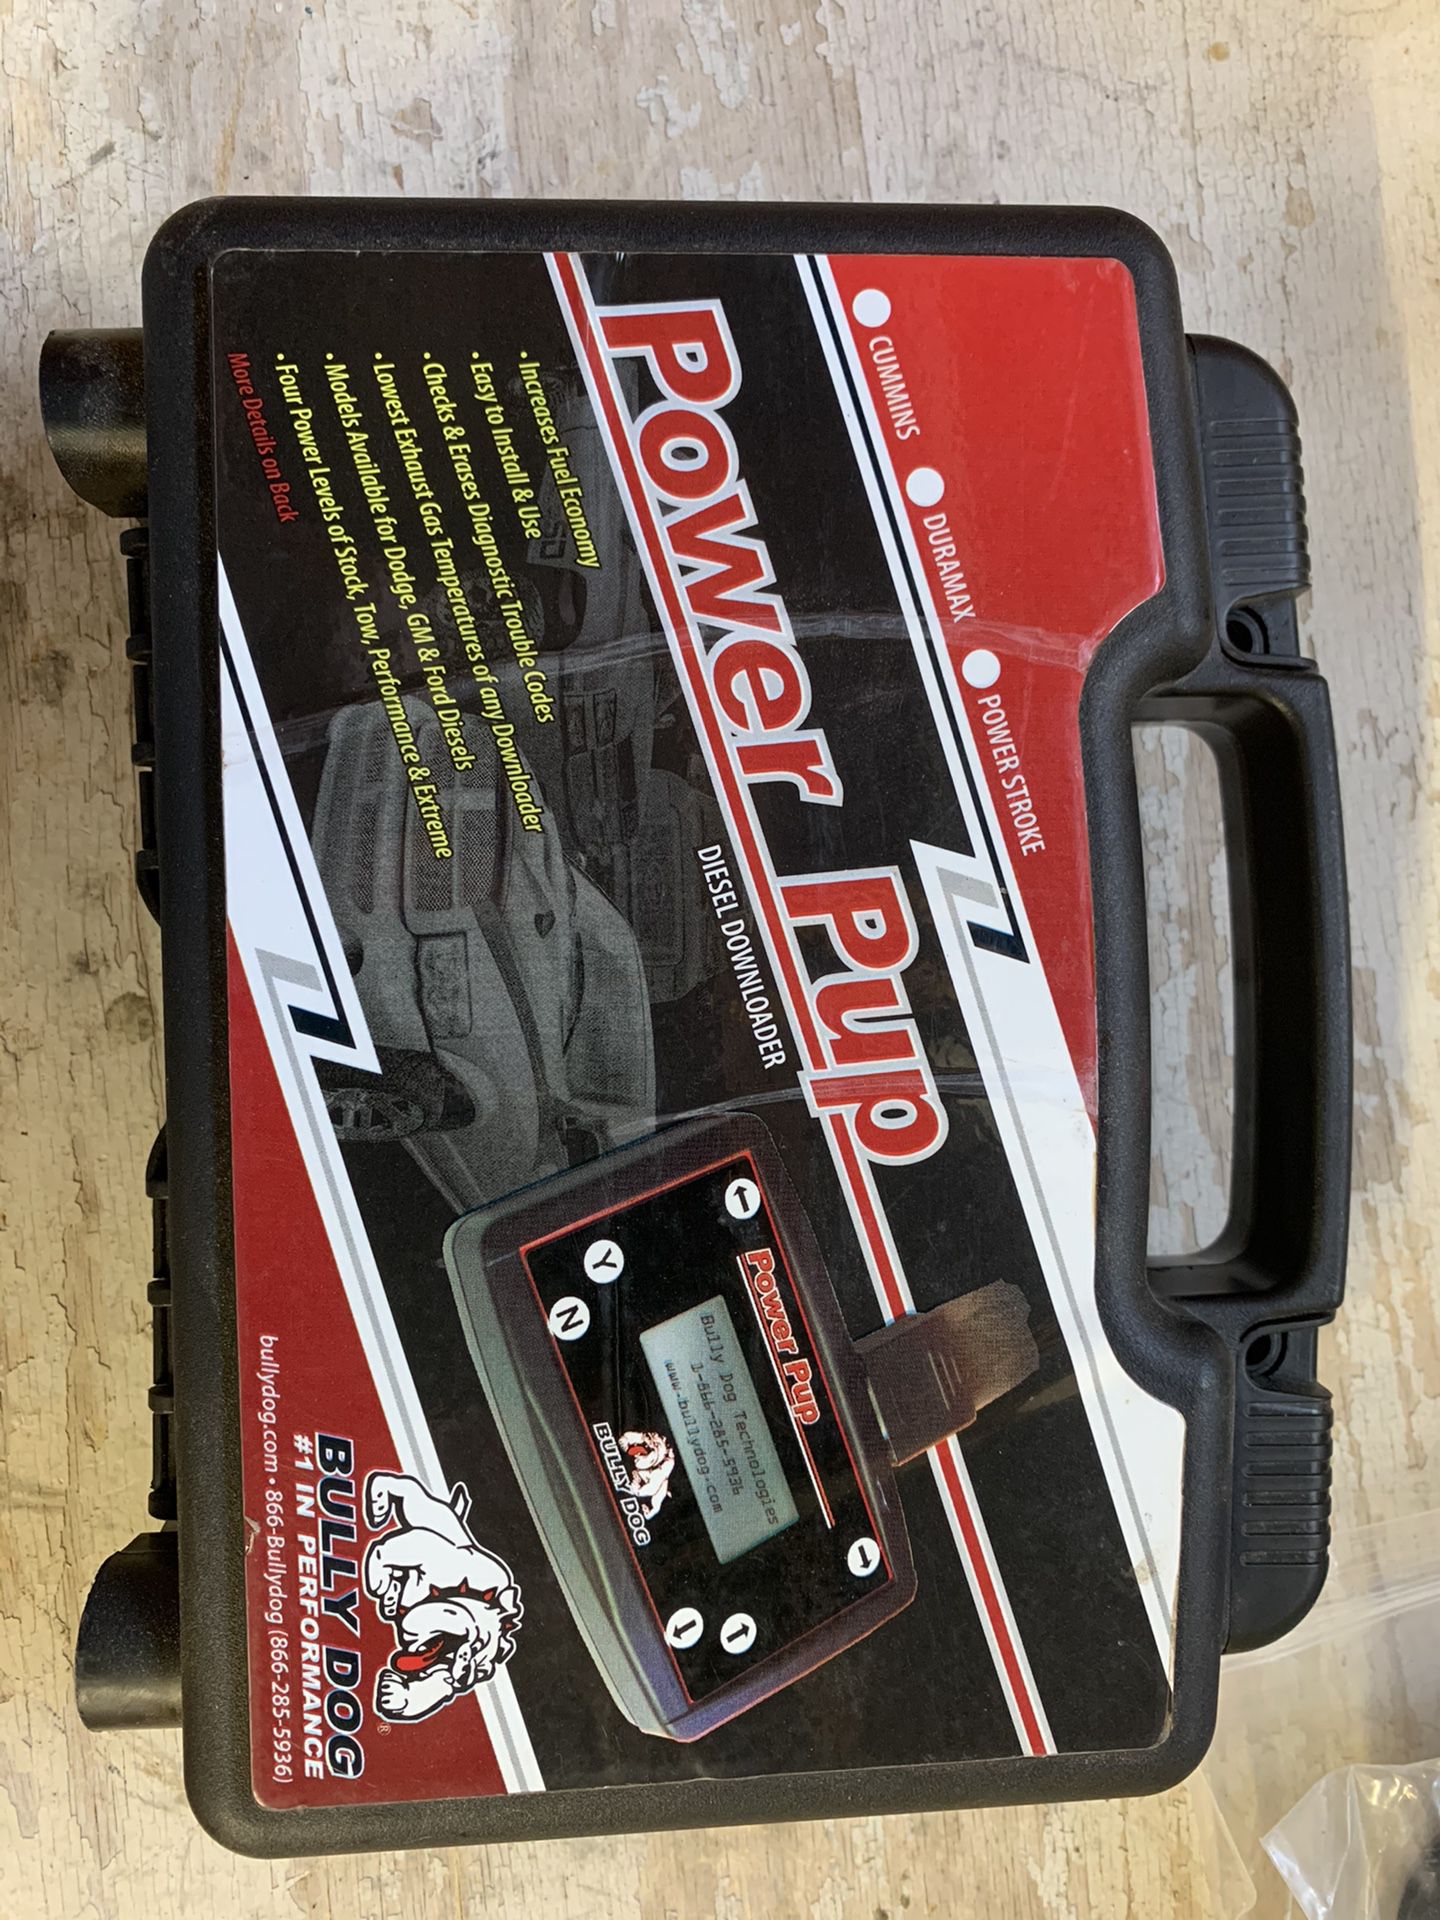 Bully Dog Power Pup Ford 6.0 Programmer